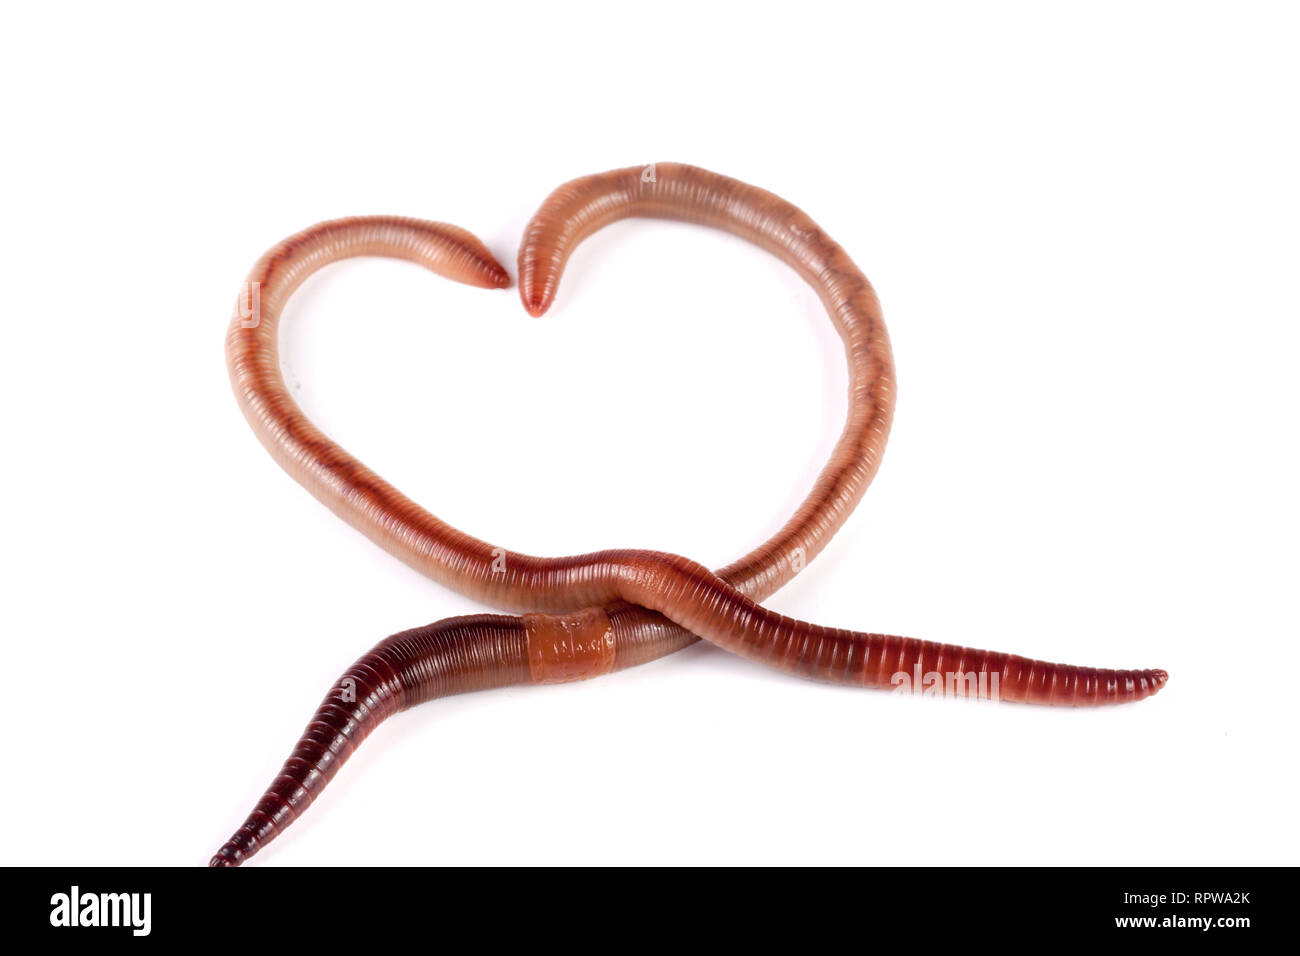 Two earthworms in the shape of heart isolated on white background